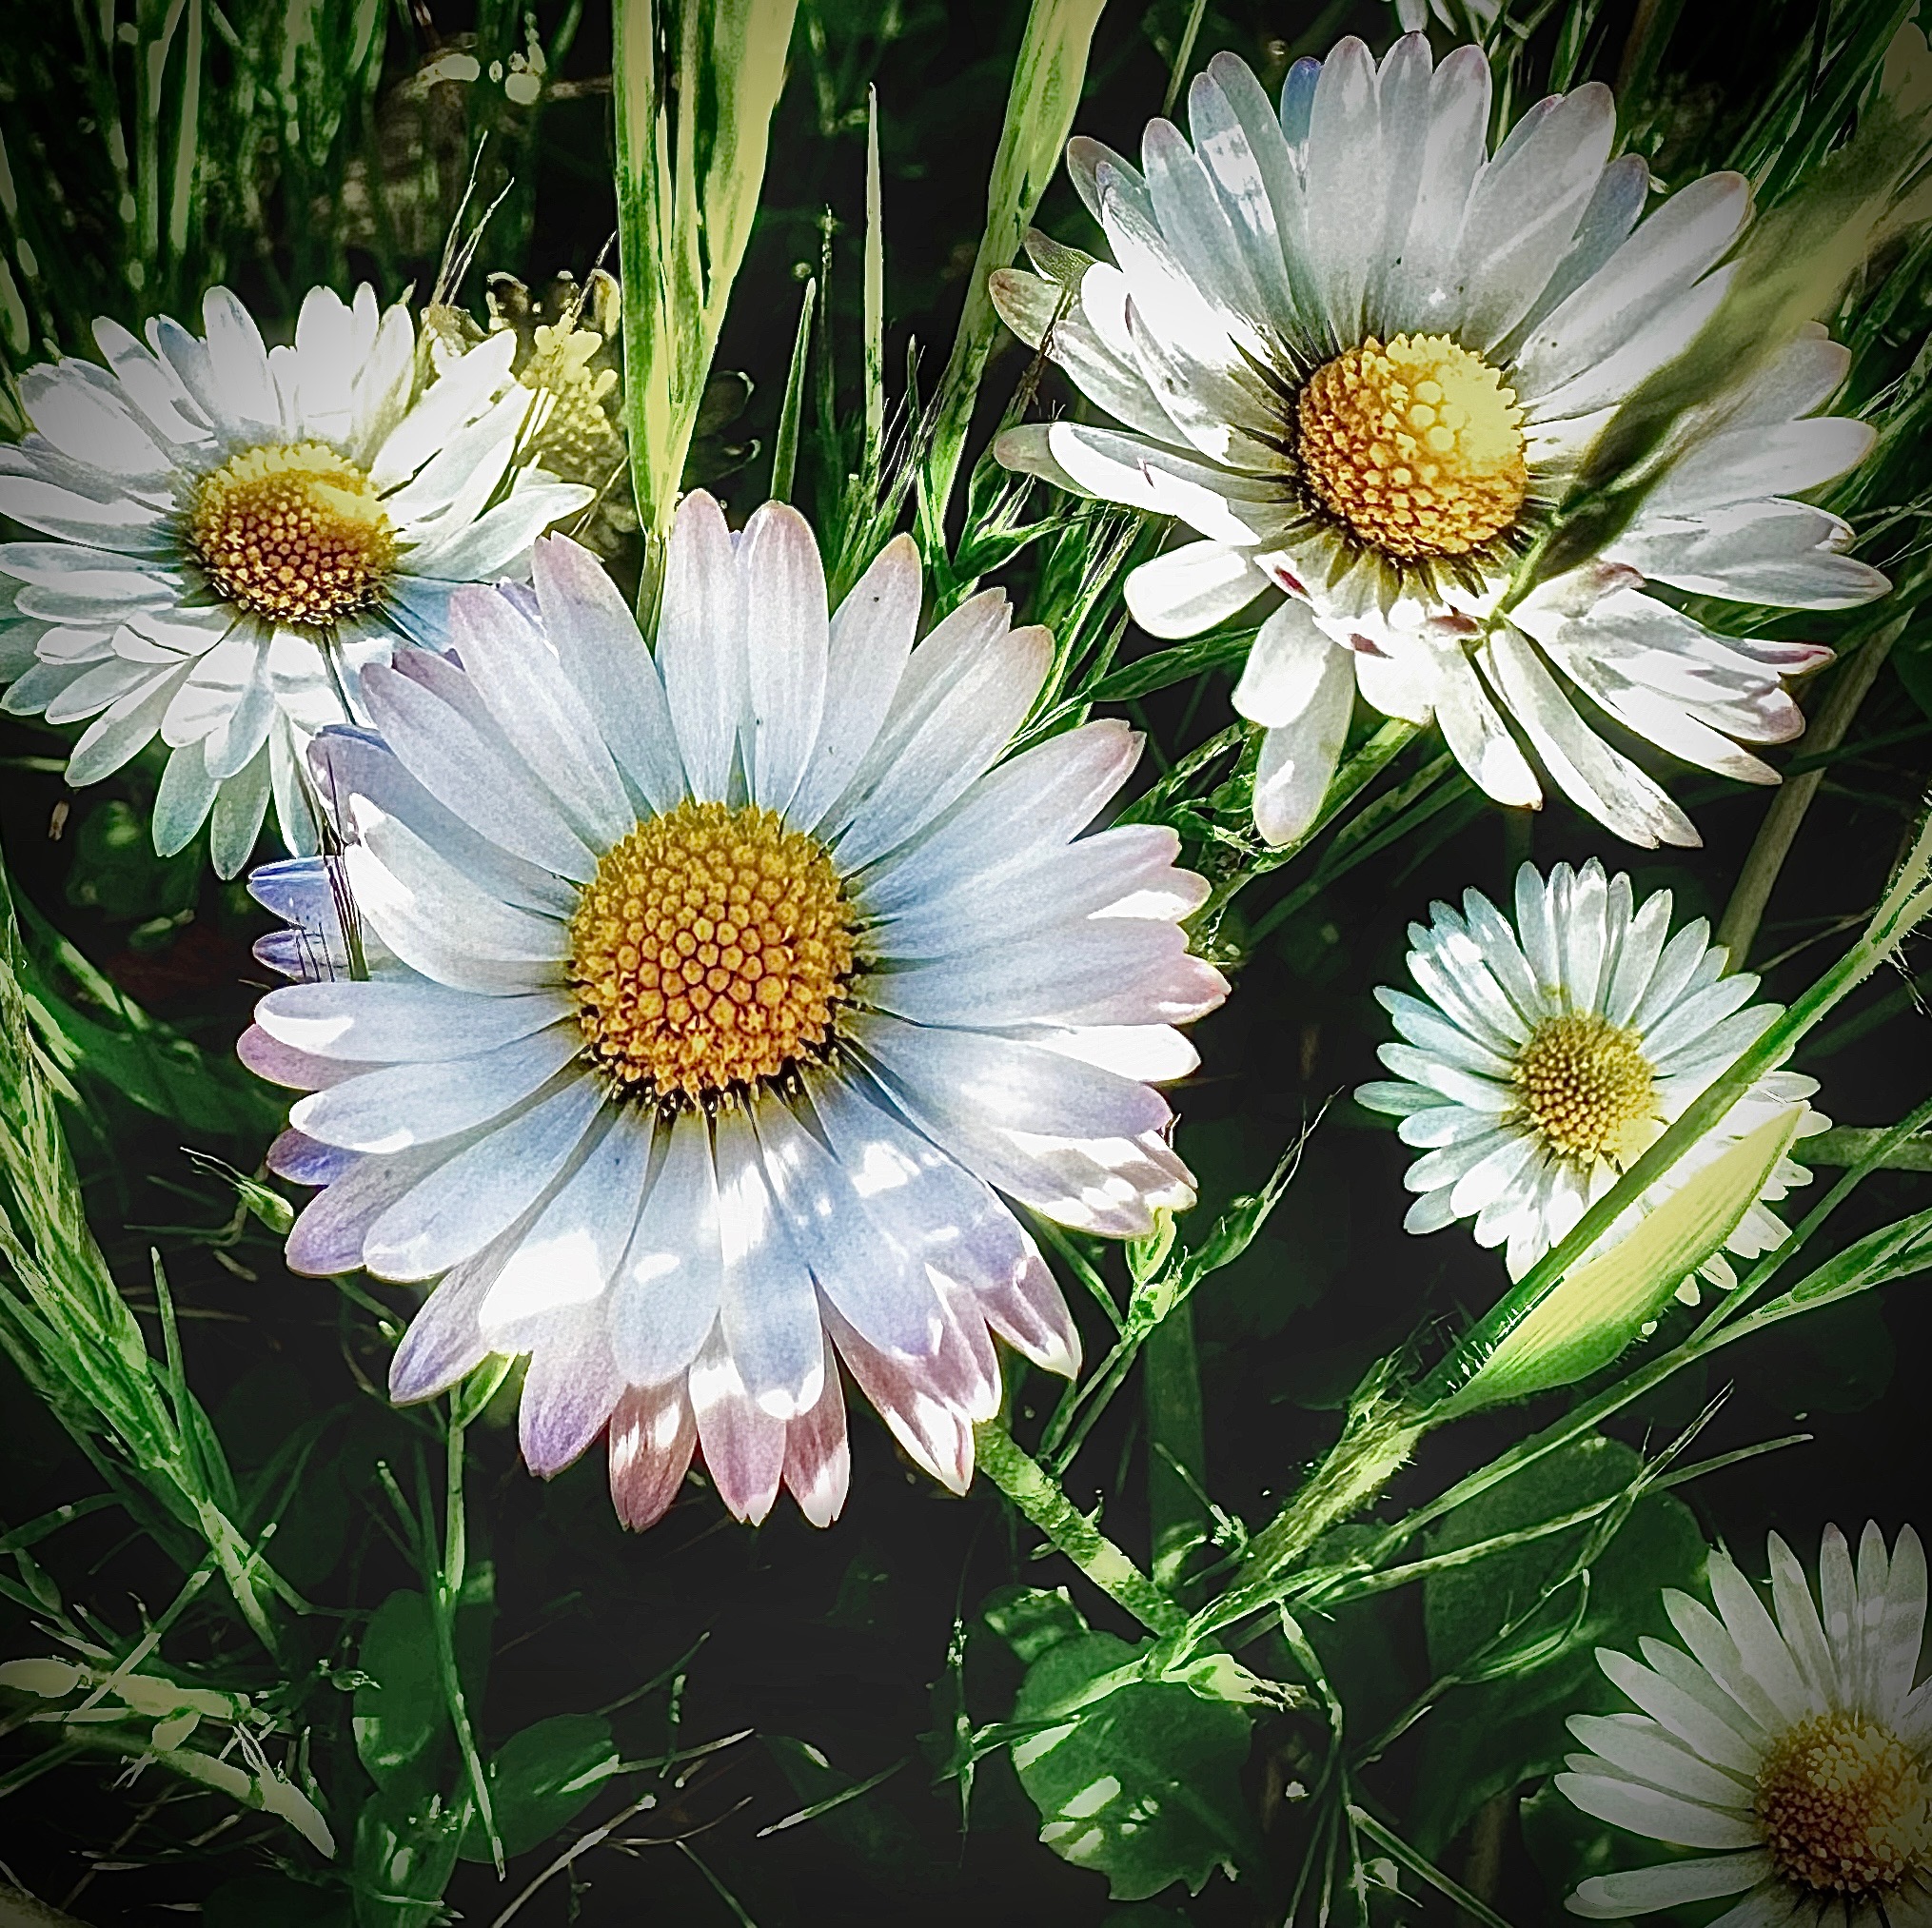 Daisies in the grass photograph - daisies in the grass fine art print.